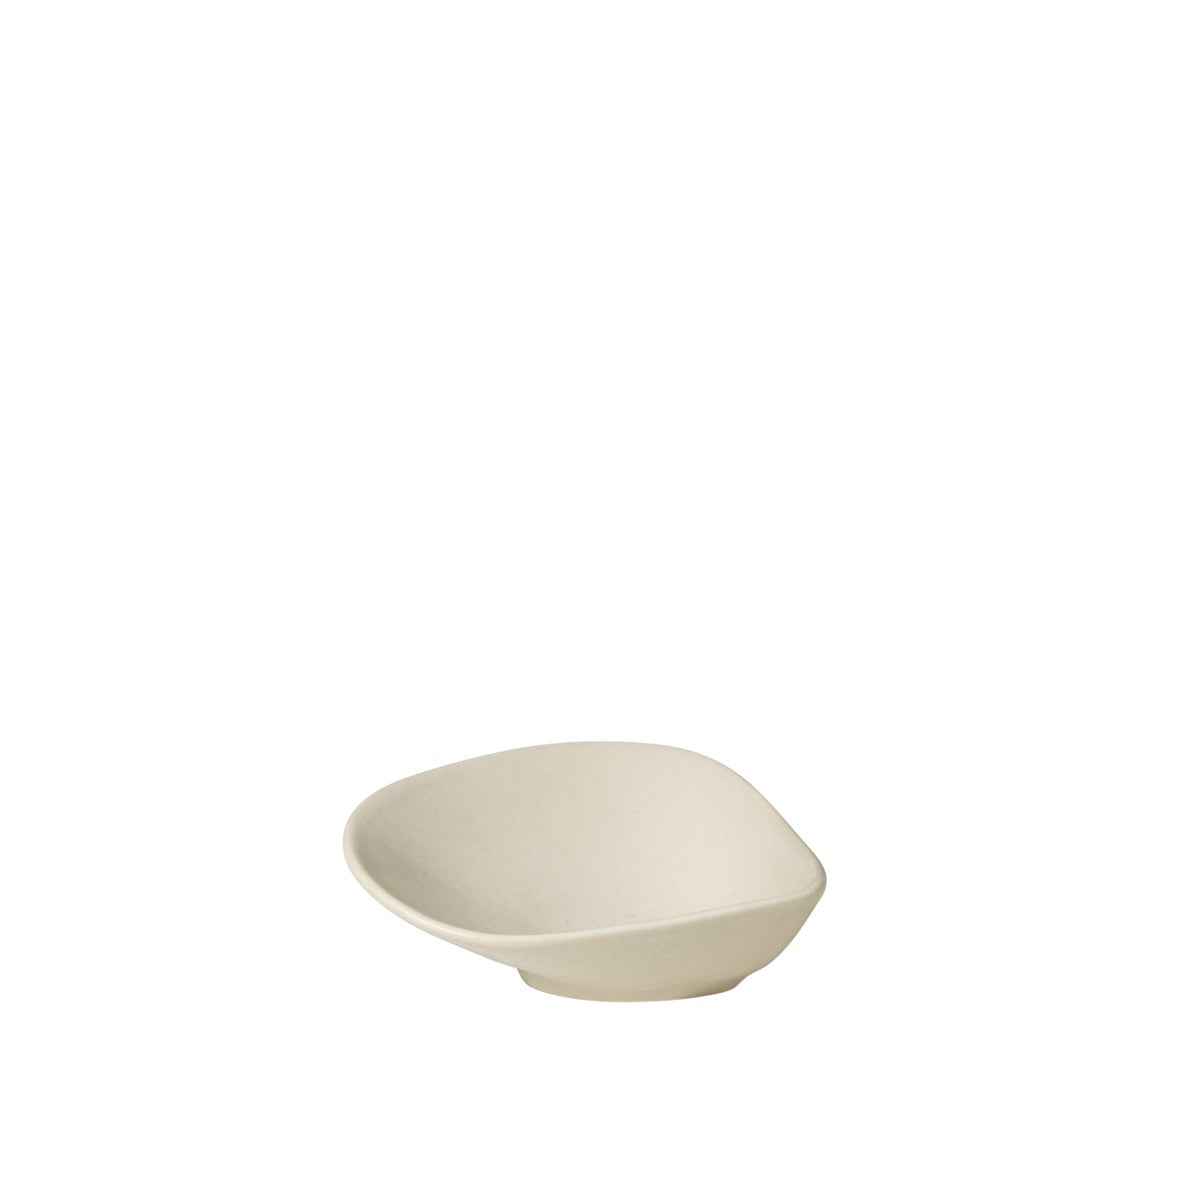 Limfjord Bowl Small Beige